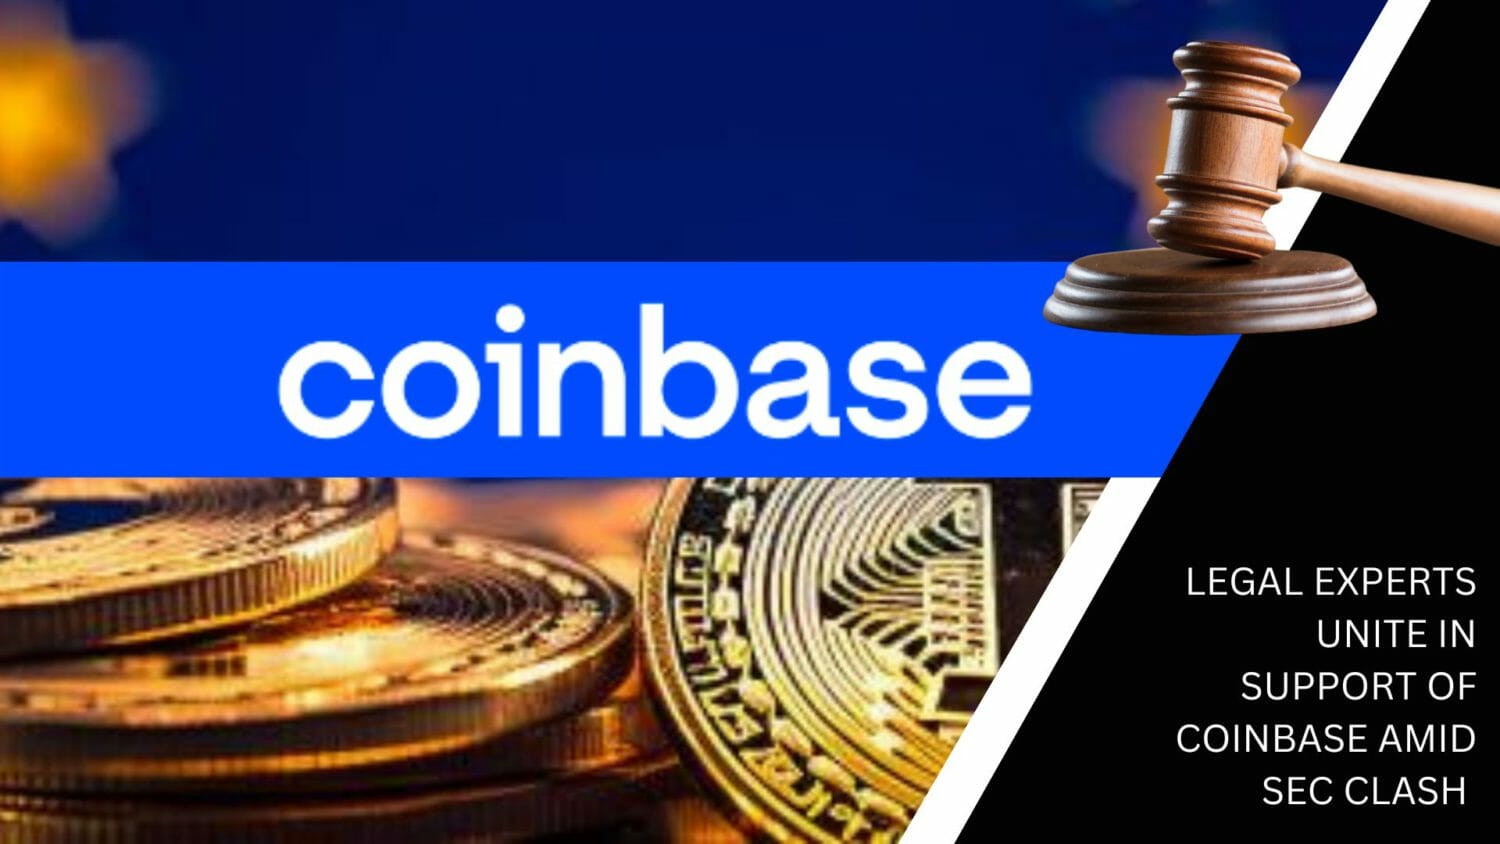 Legal Experts Unite In Support Of Coinbase Amid Sec Clash